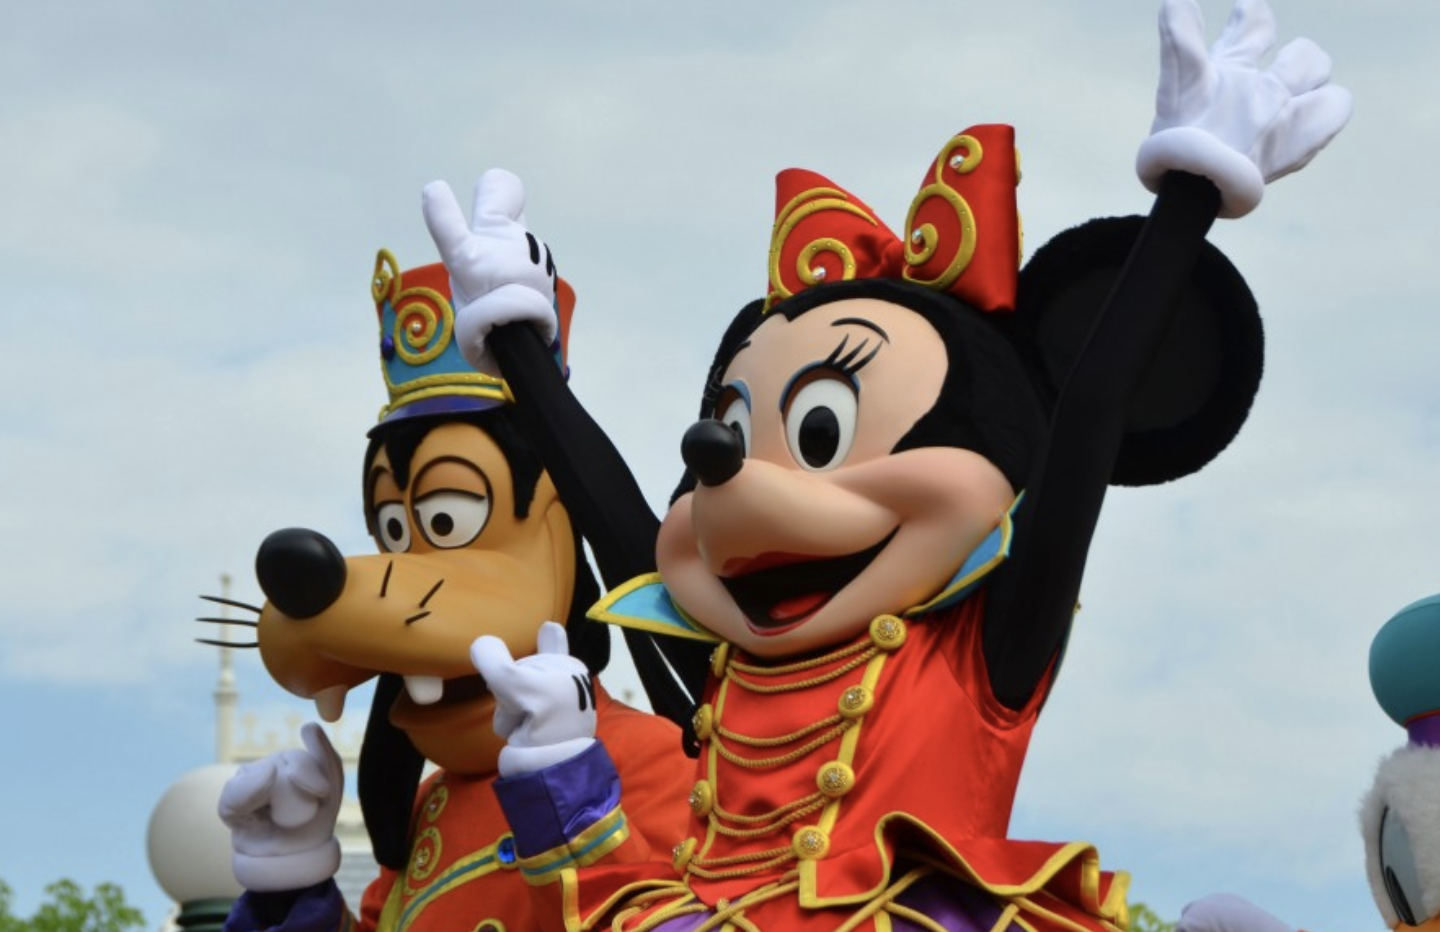 Disney characters on parade